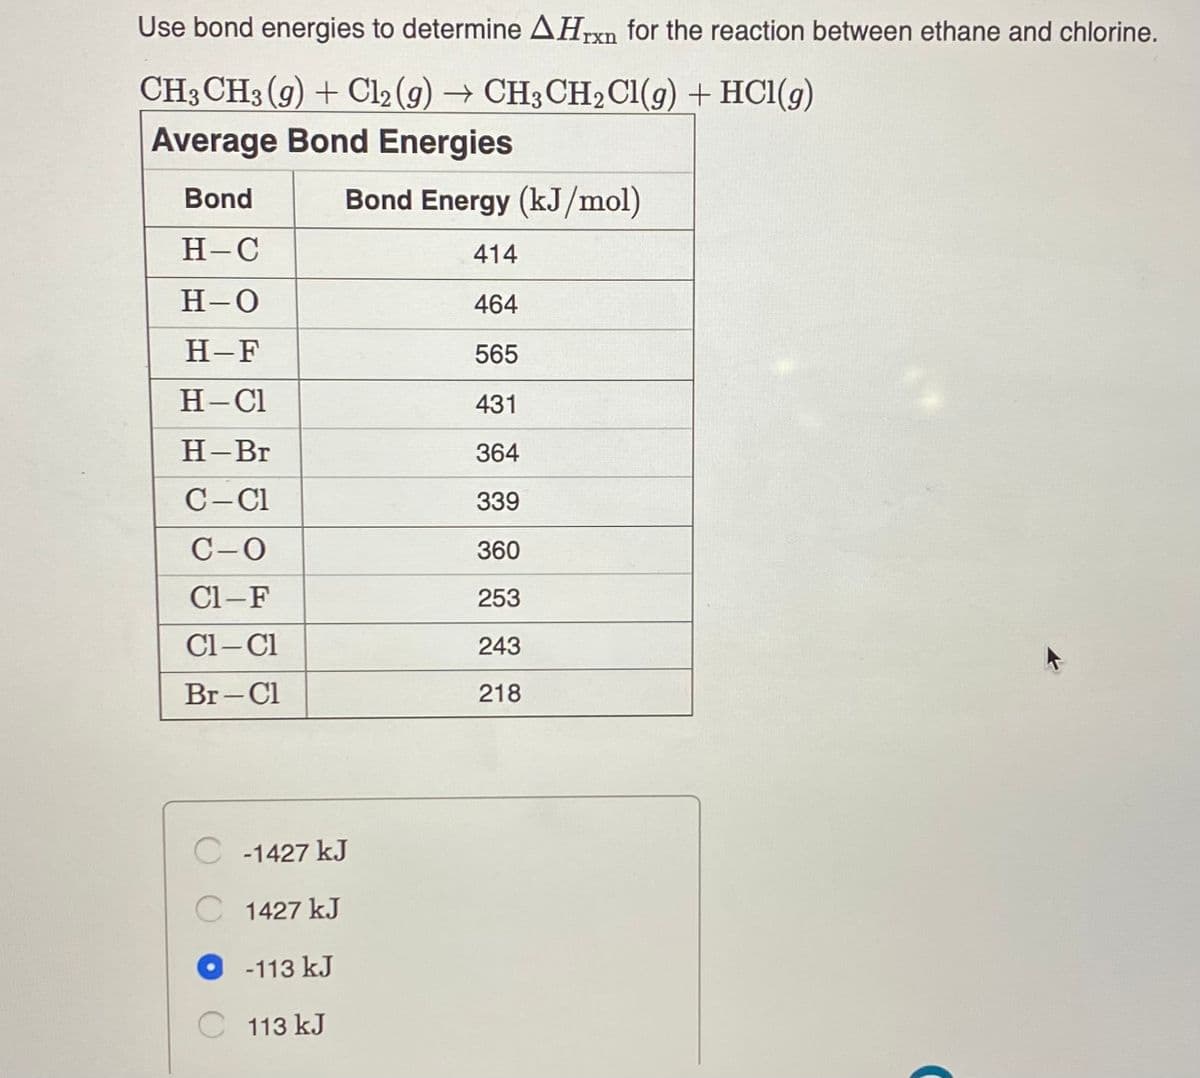 Use bond energies to determine AHrxn for the reaction between ethane and chlorine.
CH3 CH3 (9) + Cl2 (g) → CH3CH2CI(g) + HC1(g)
Average Bond Energies
Bond
Bond Energy (kJ/mol)
Н-С
414
H-0
464
H-F
565
H-Cl
431
Н-Вг
364
C-Cl
339
C-0
360
Cl-F
253
Cl- Cl
243
Br-Cl
218
C -1427 kJ
C 1427 kJ
O - 113 kJ
C 113 kJ
